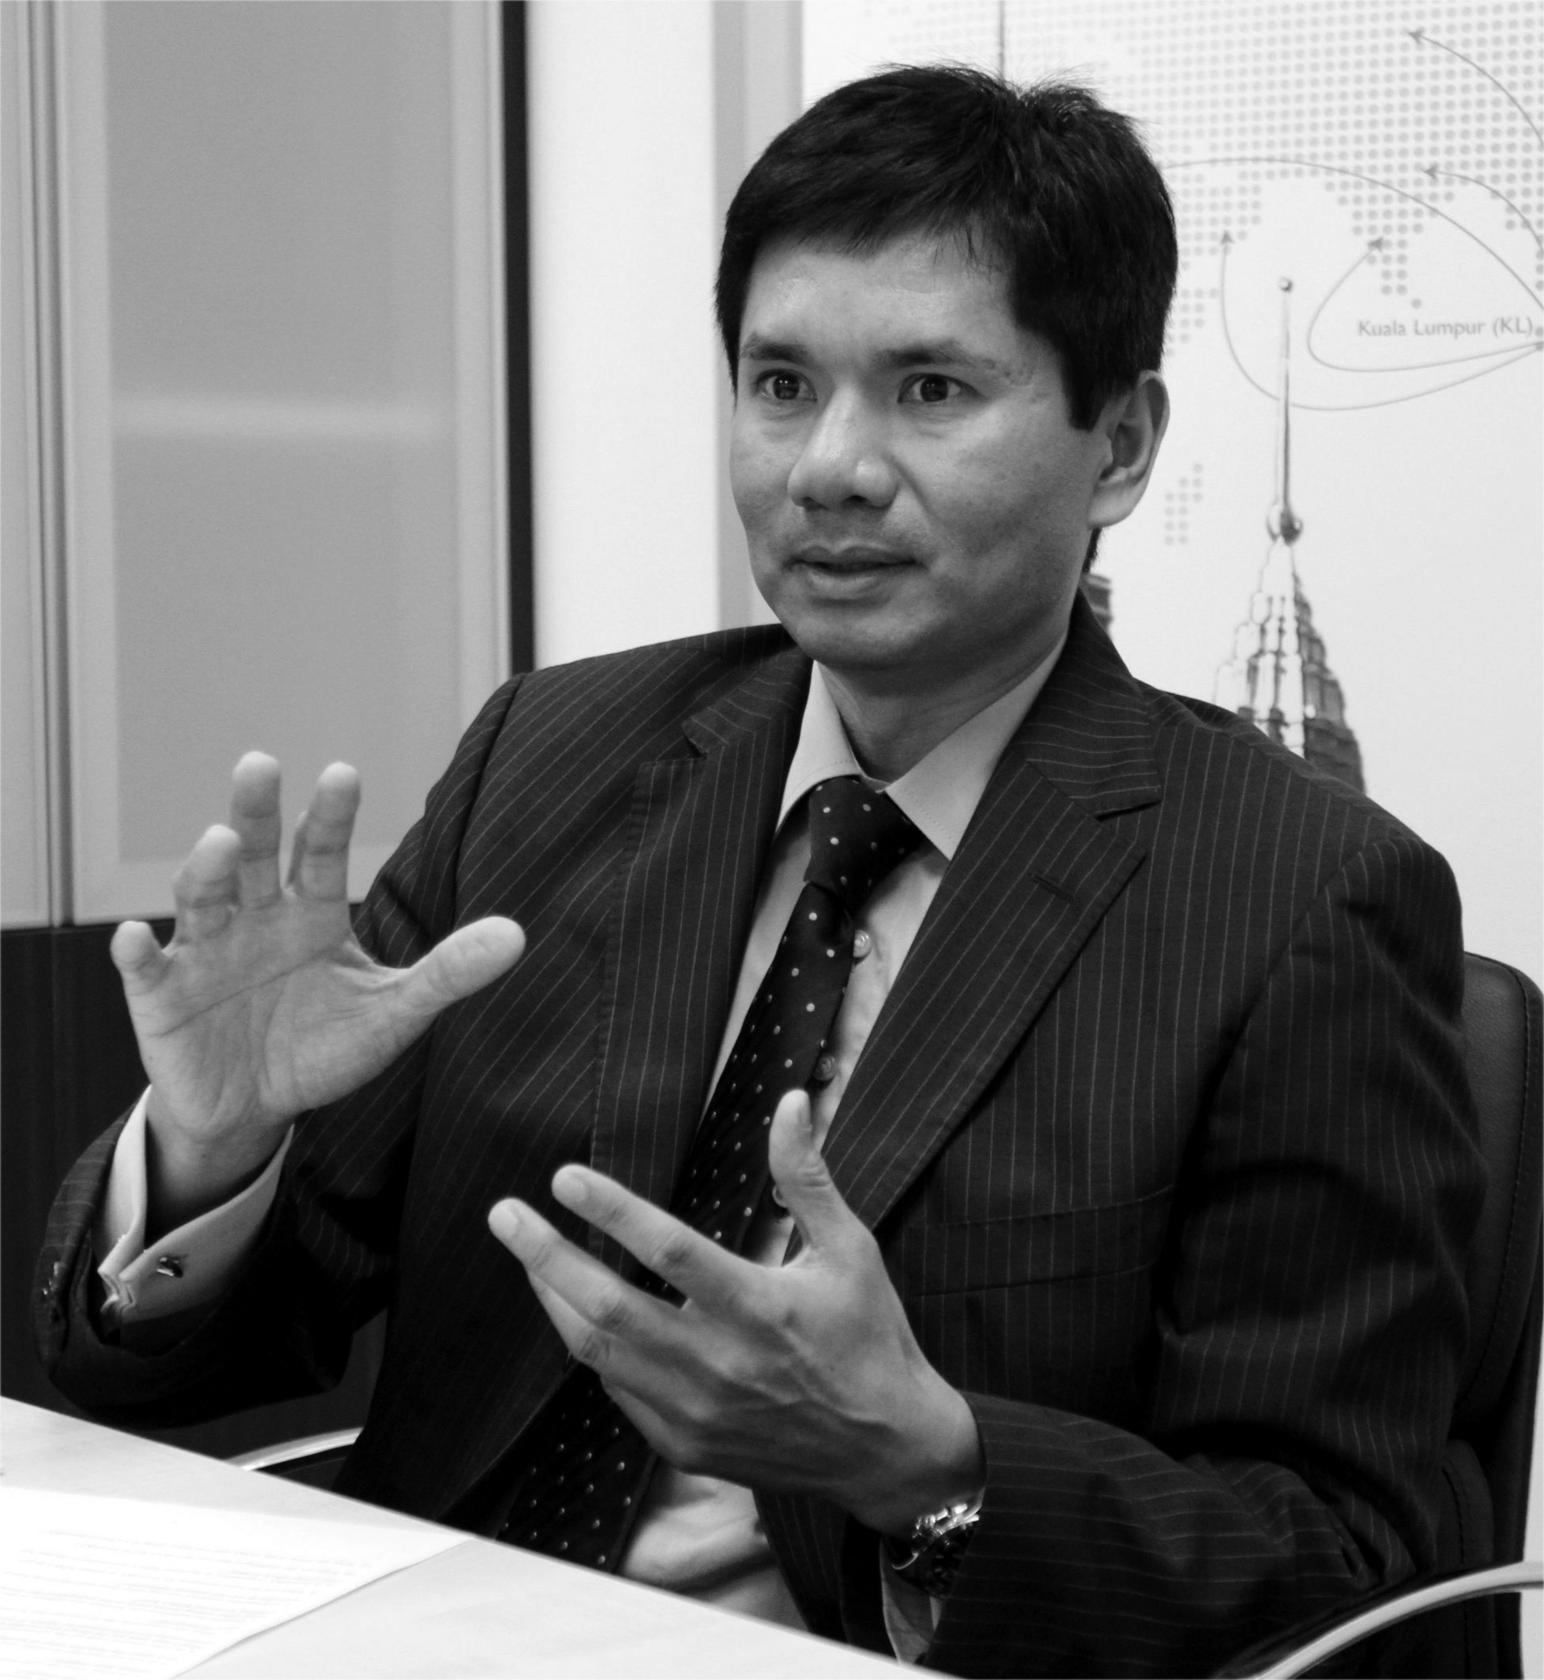 InvestKL CEO Zainal Amanshah says the company has a pivotal role in Malaysia's transformation.Photo: The Star, Malaysia